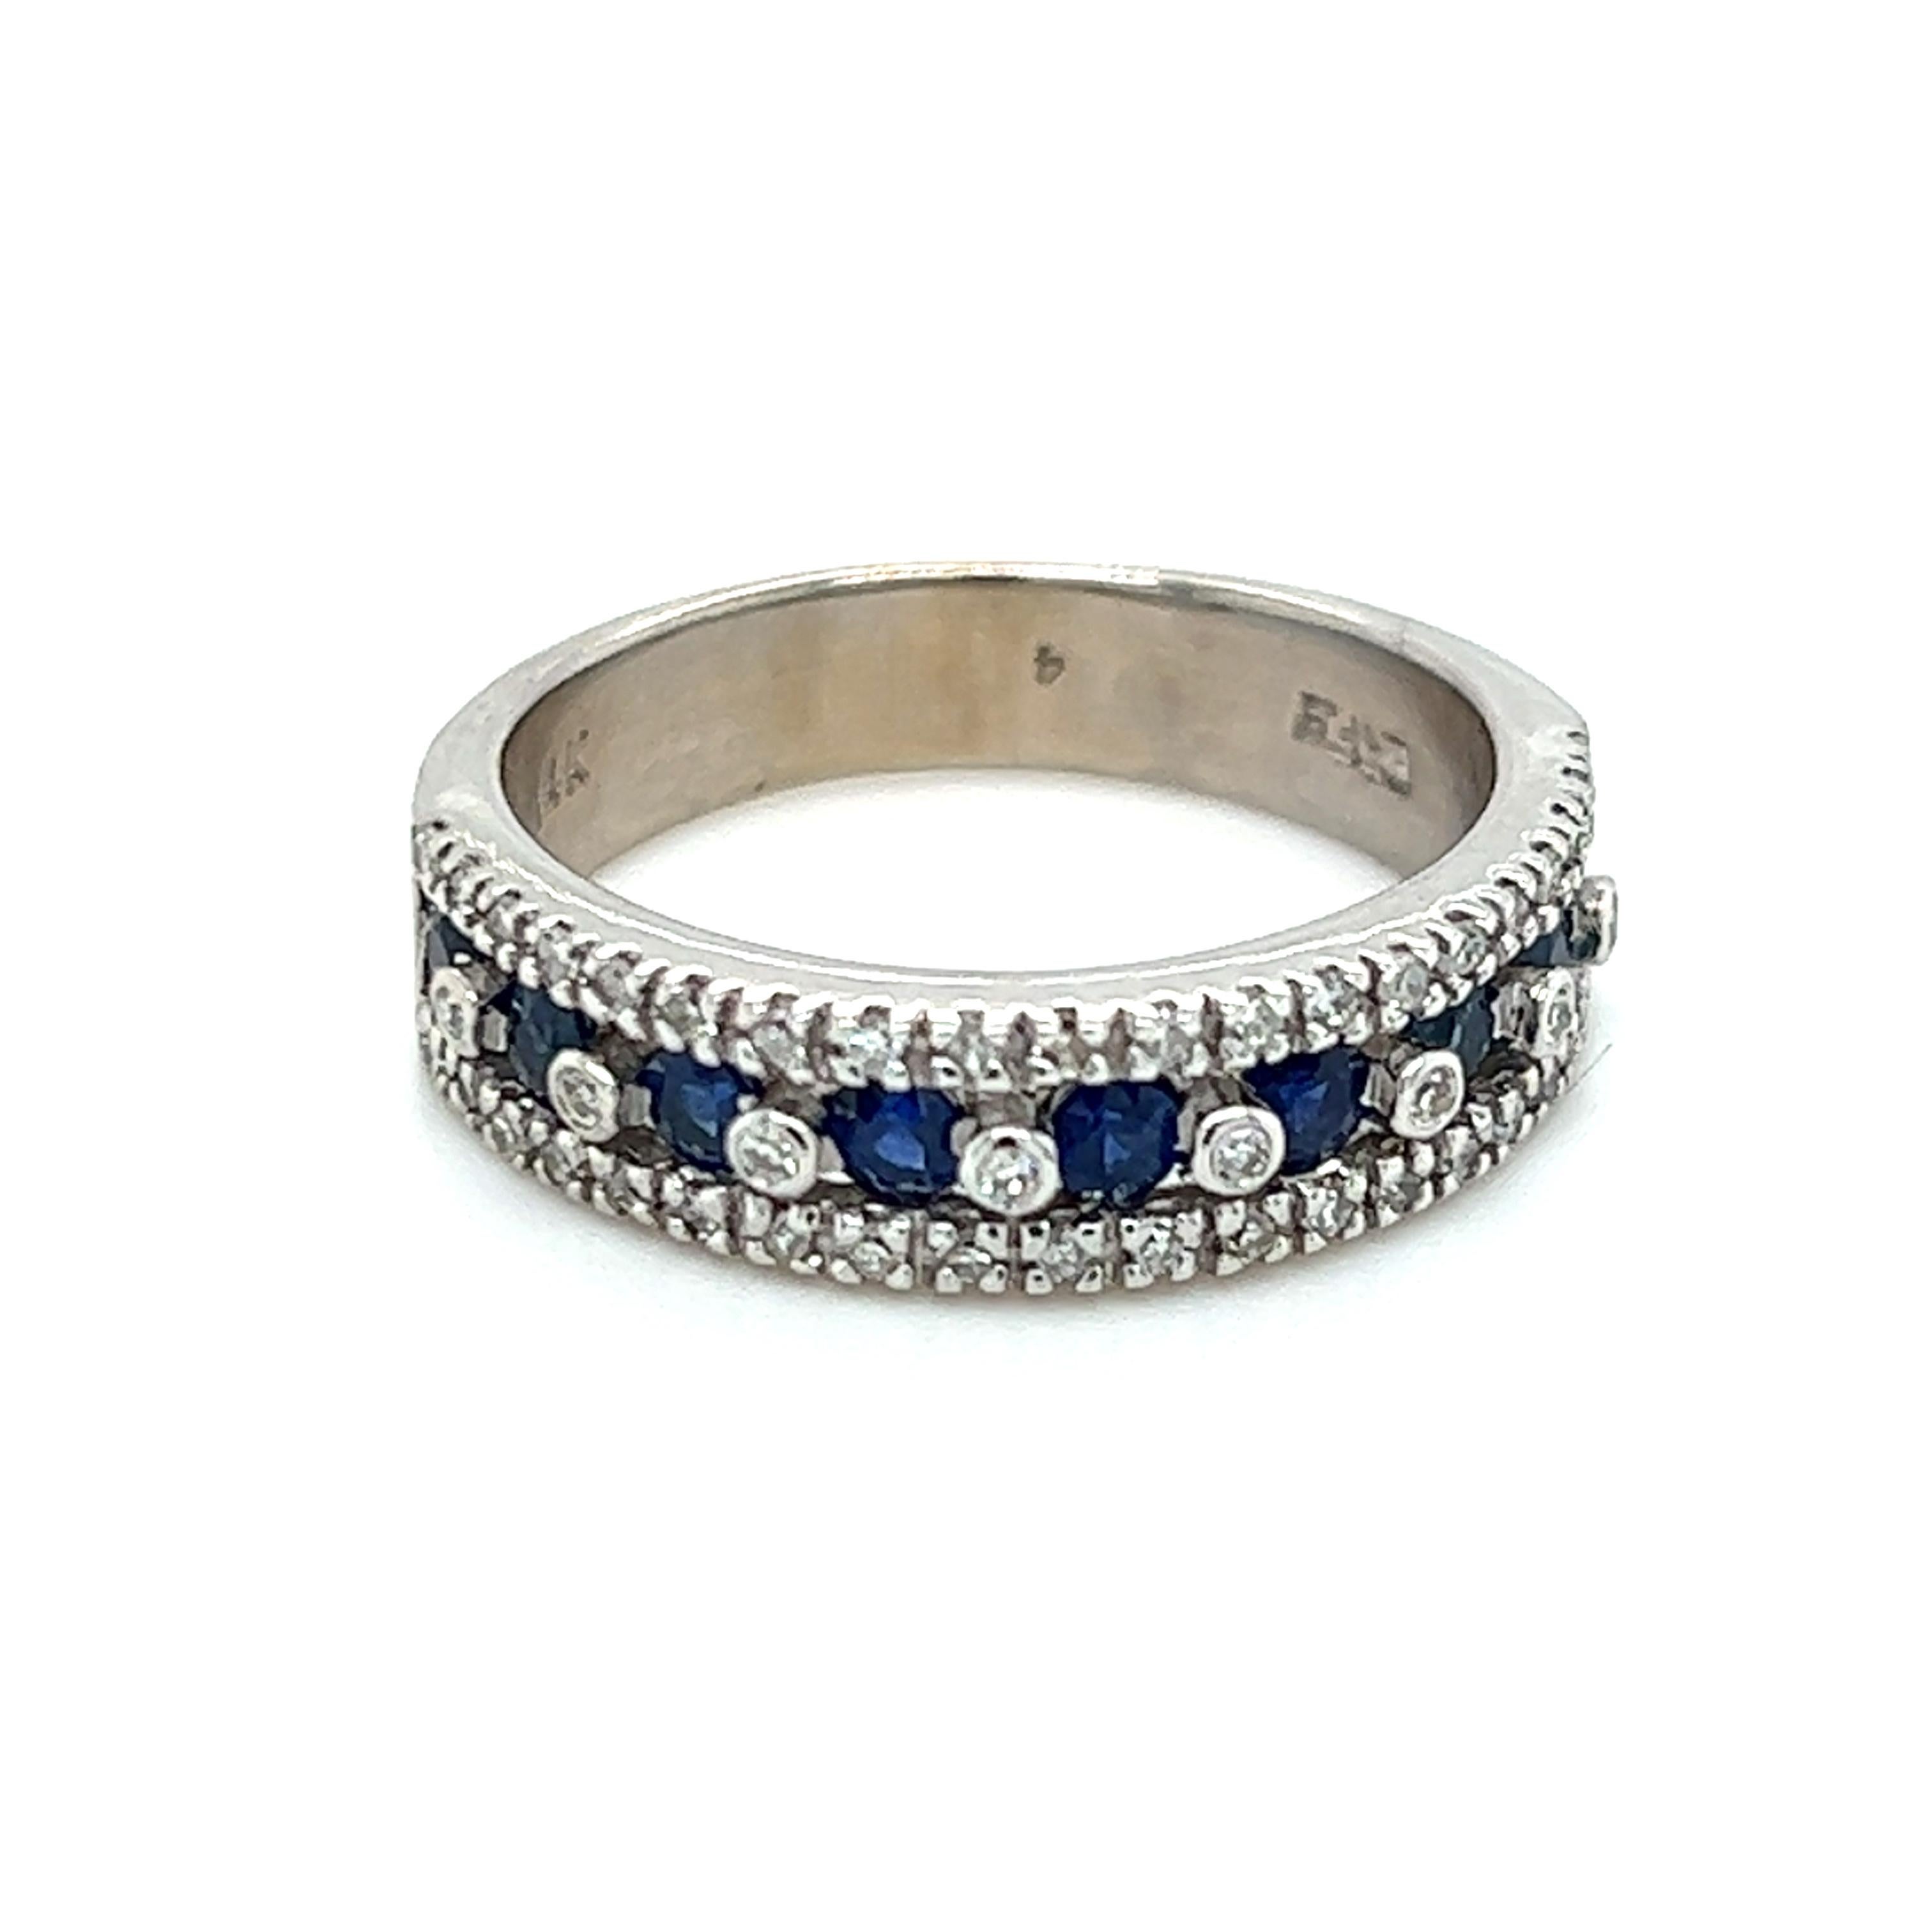 One 14-karat white gold band set with nine (9) 2.75mm round natural blue sapphires and fifty-five (55)  brilliant cut diamonds, approximately 0.50-carat total weight with matching I/J color and SI/I1 clarity.  The top of the ring measures 5.52mm and